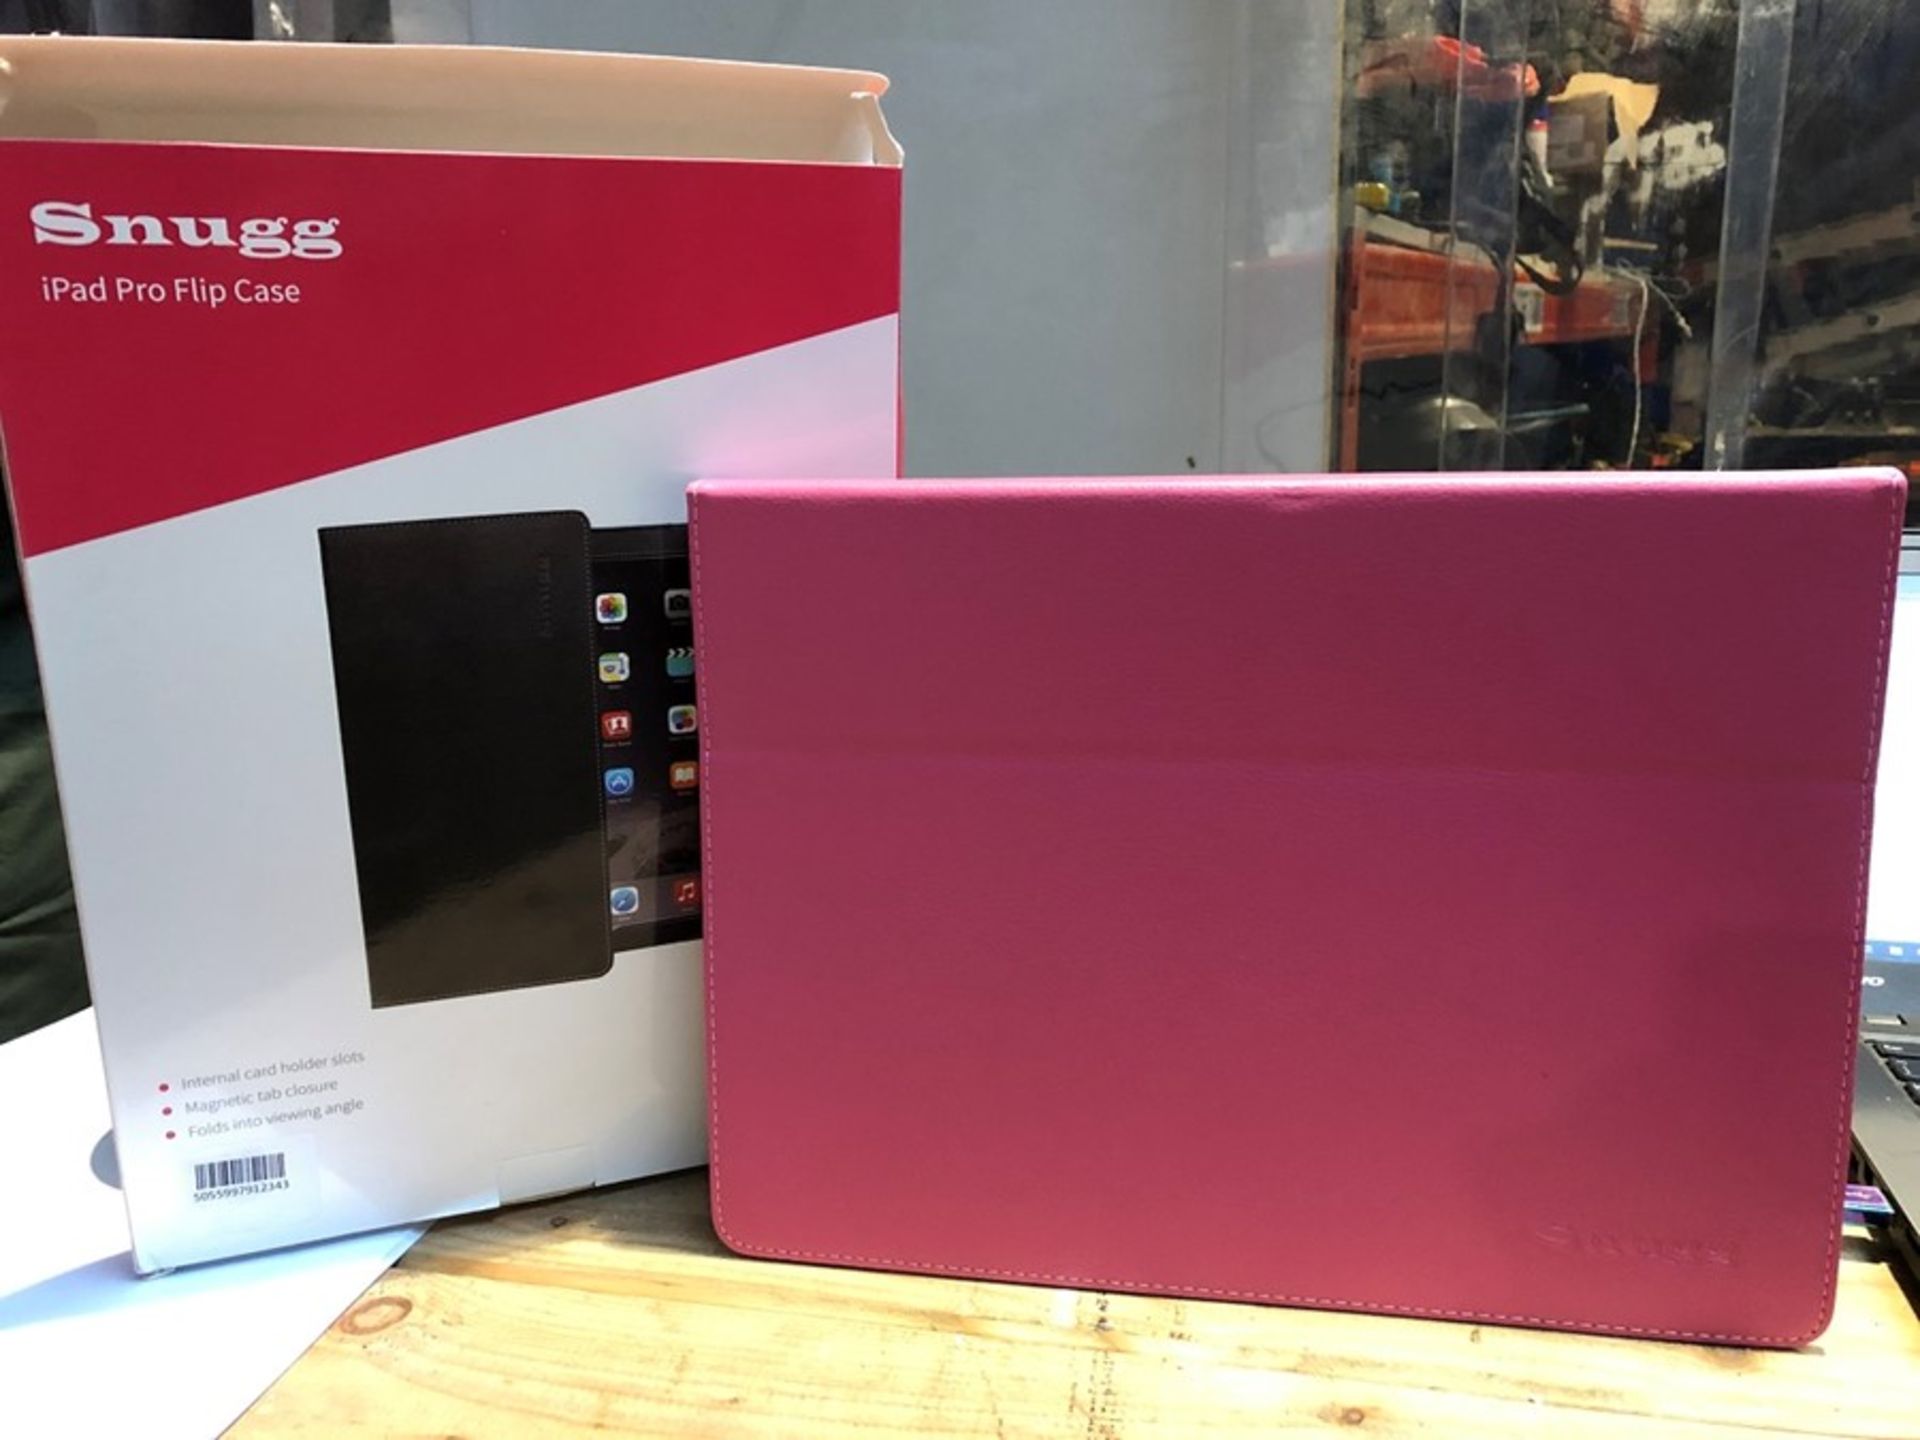 1 LOT TO CONTAIN 2 BOXED SNUGG IPAD PRO FLIP CASES 12.9 INCH IN PINK / RRP £49.98 (PUBLIC VIEWING